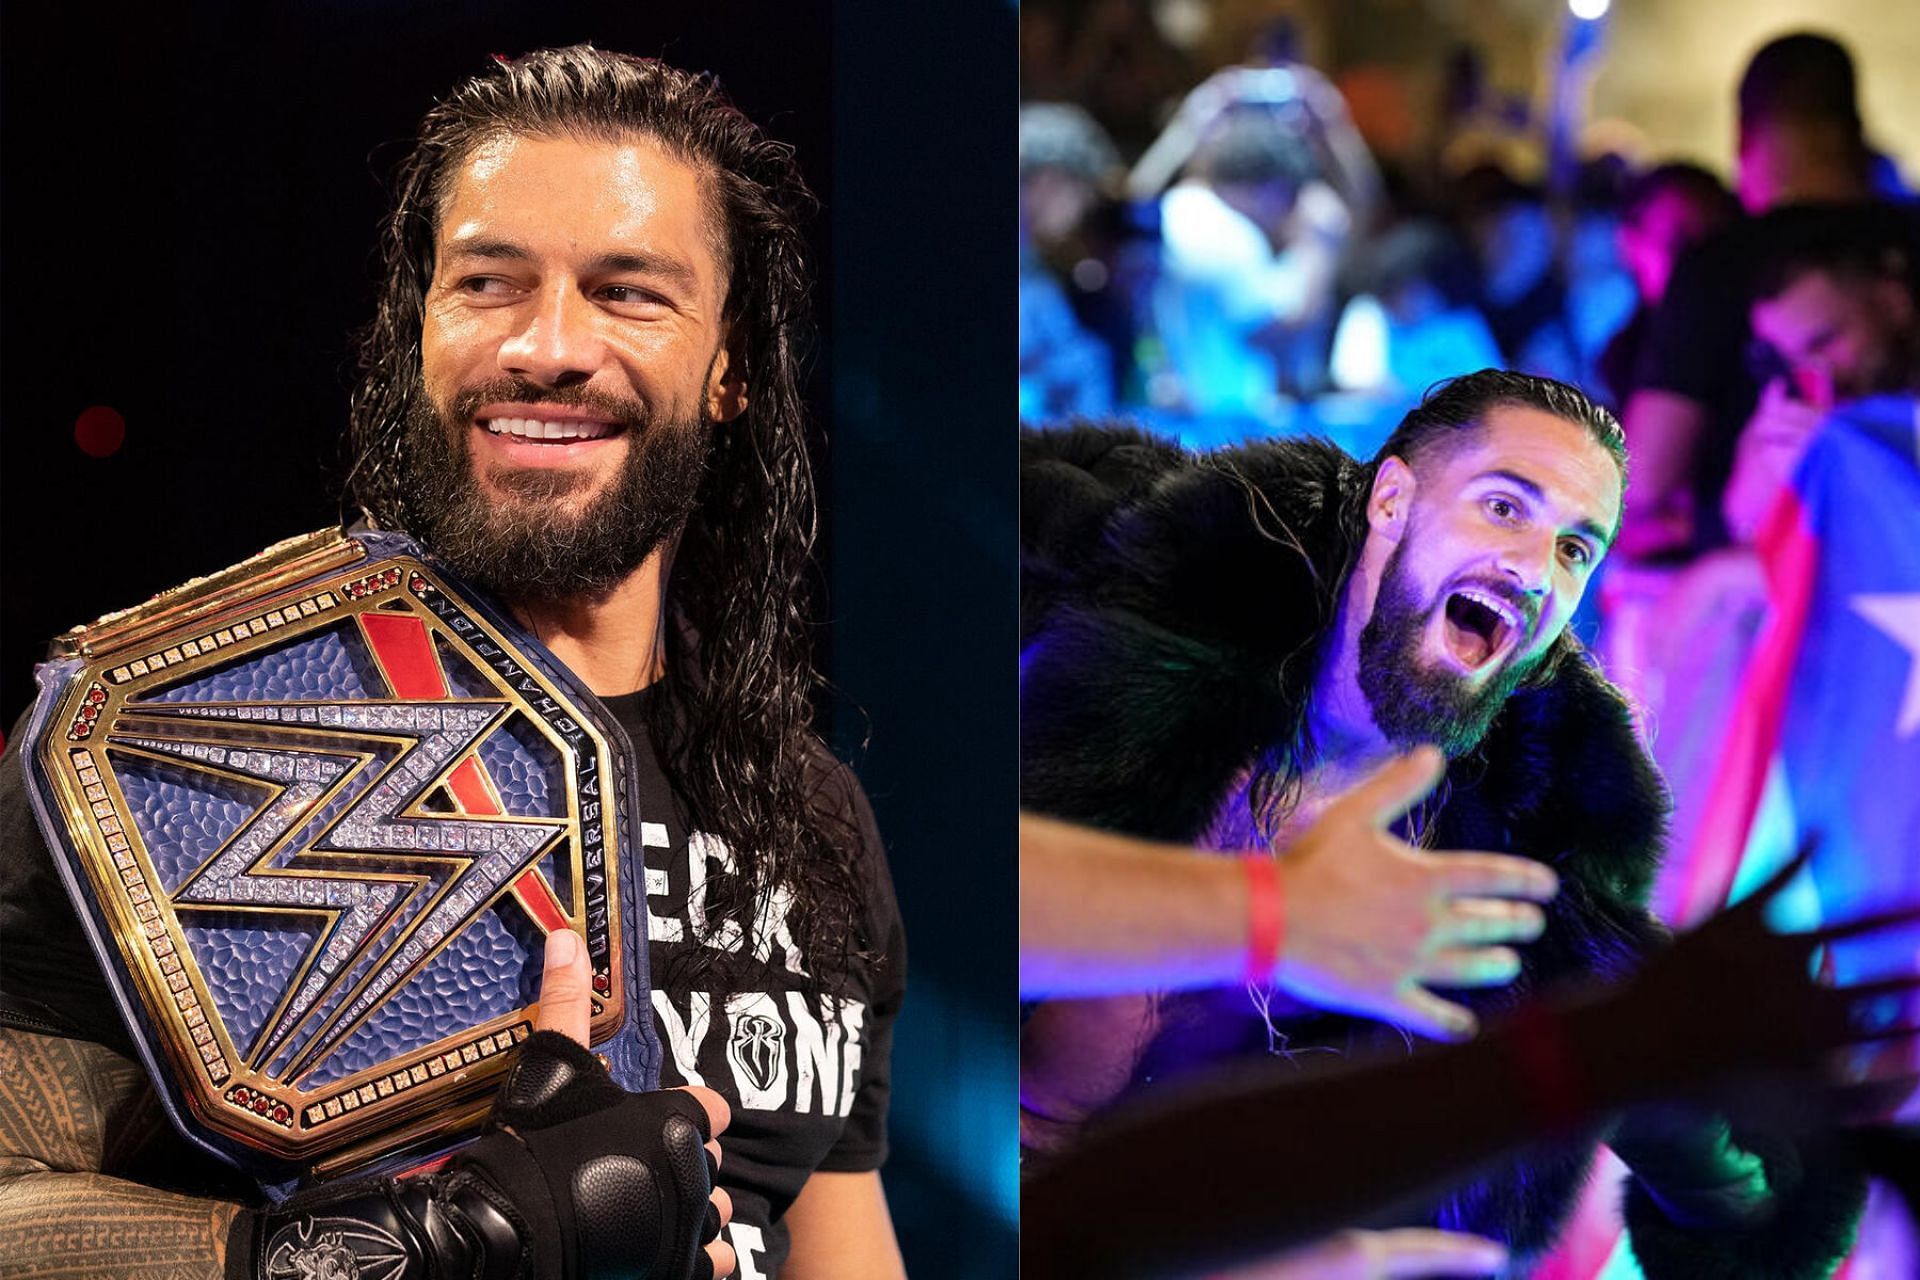 Roman Reigns and Seth Rollins are having  tremendous run in WWE [Image Credits: wwe.com ]